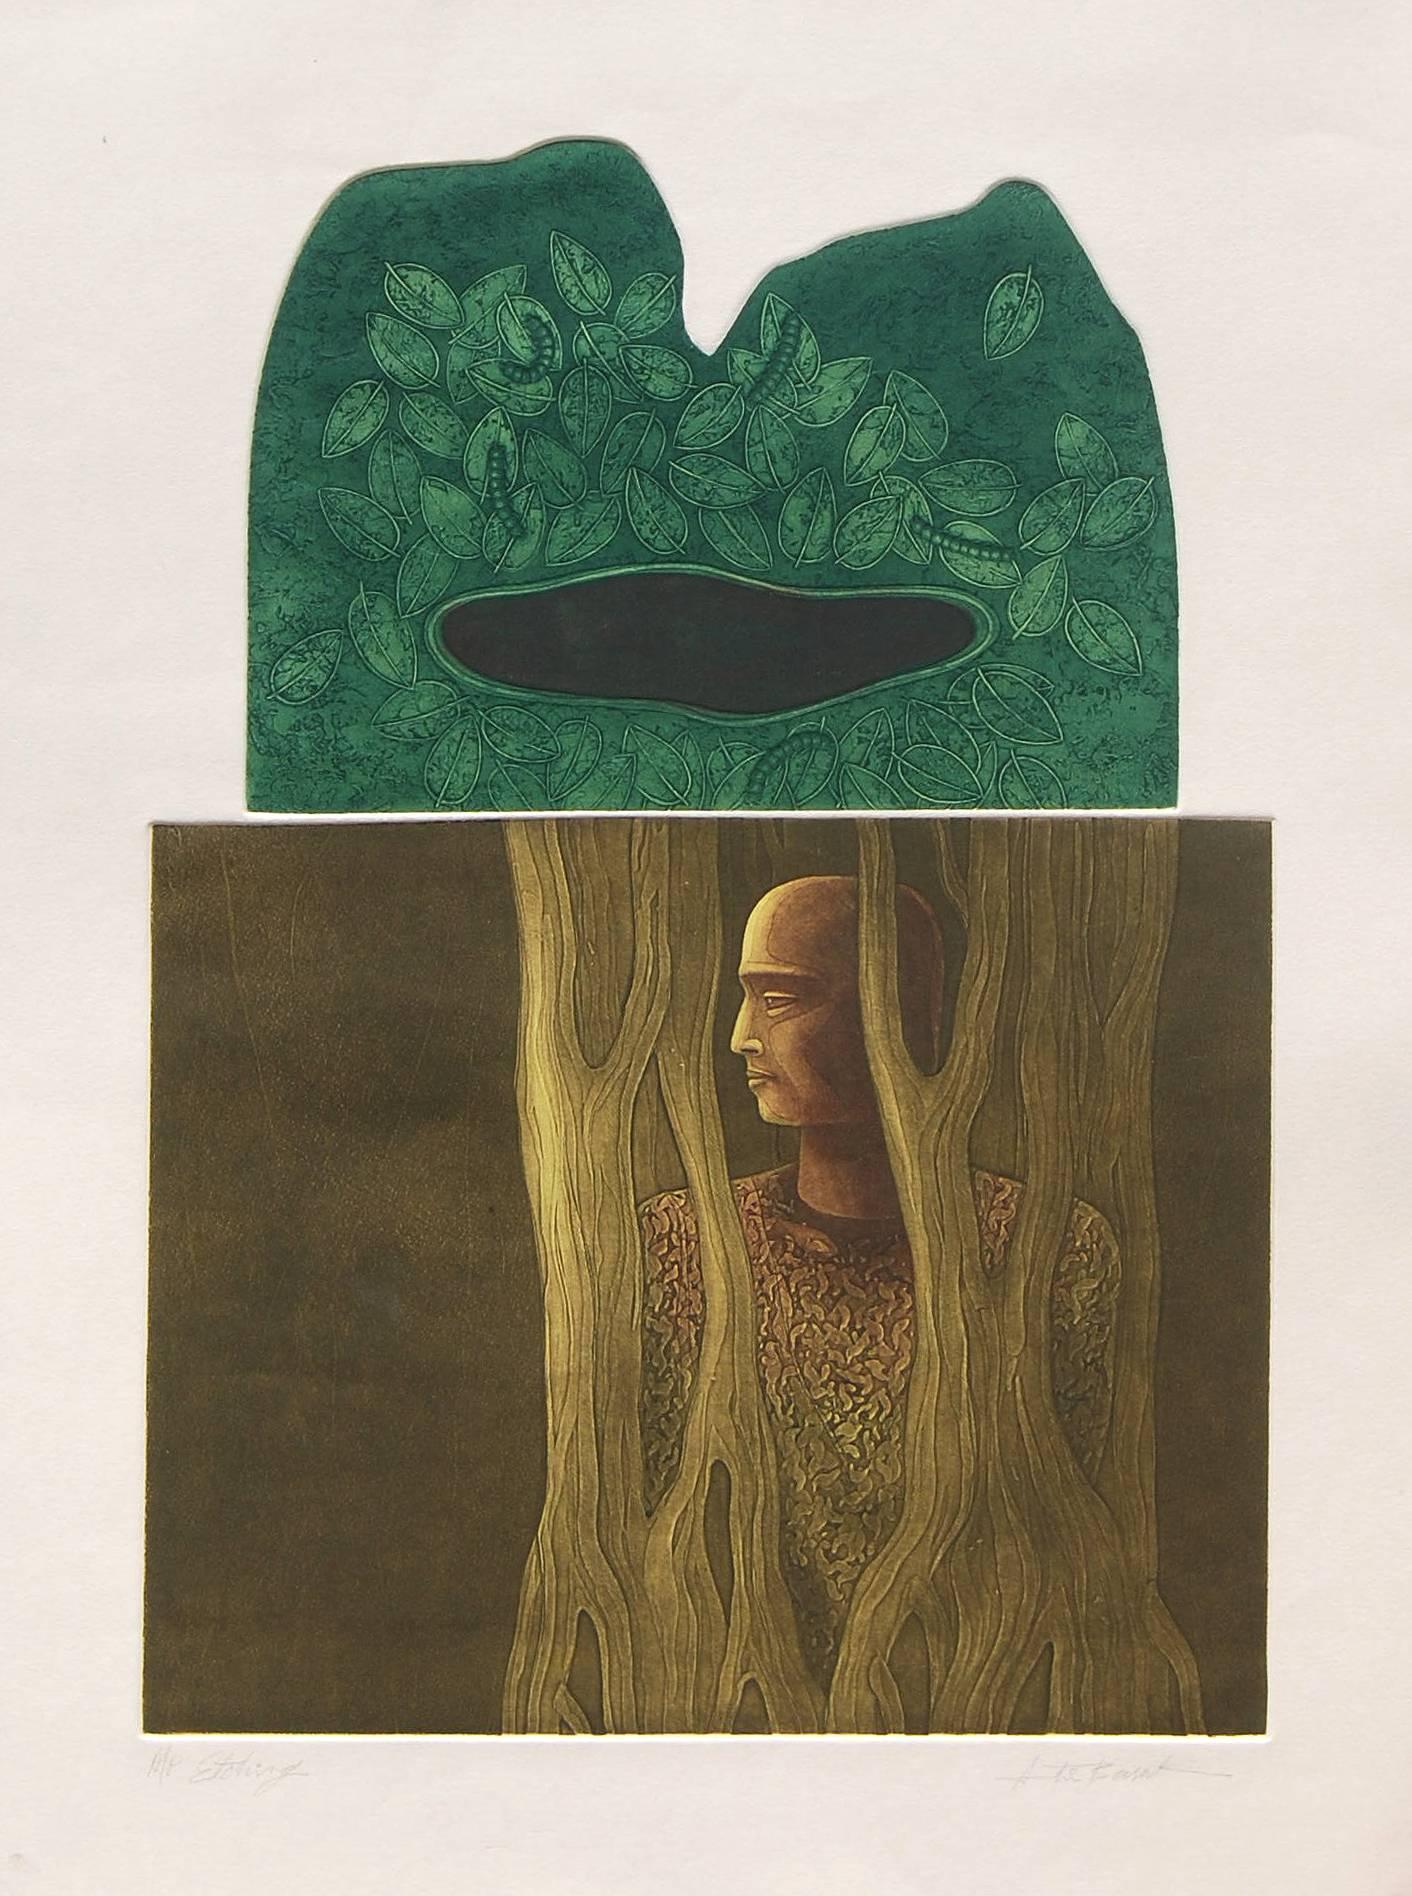 Atin Basak Figurative Print - Figurative, Tree, Etching on paper, Green & Brown by Indian Artist "In Stock"